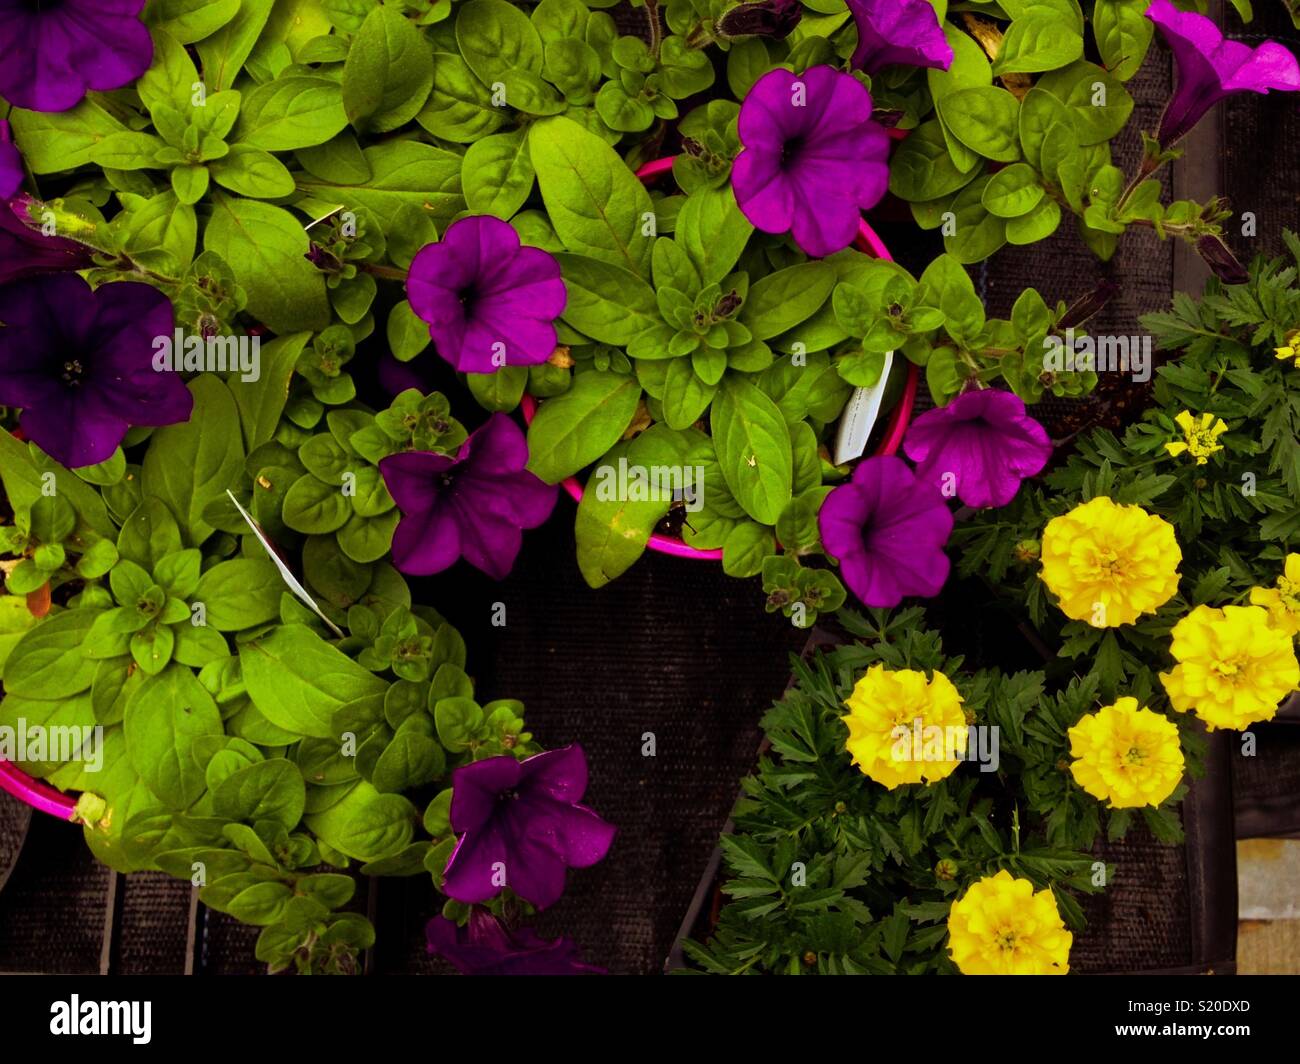 Yellow marigolds and purple petunias in the garden center Stock Photo